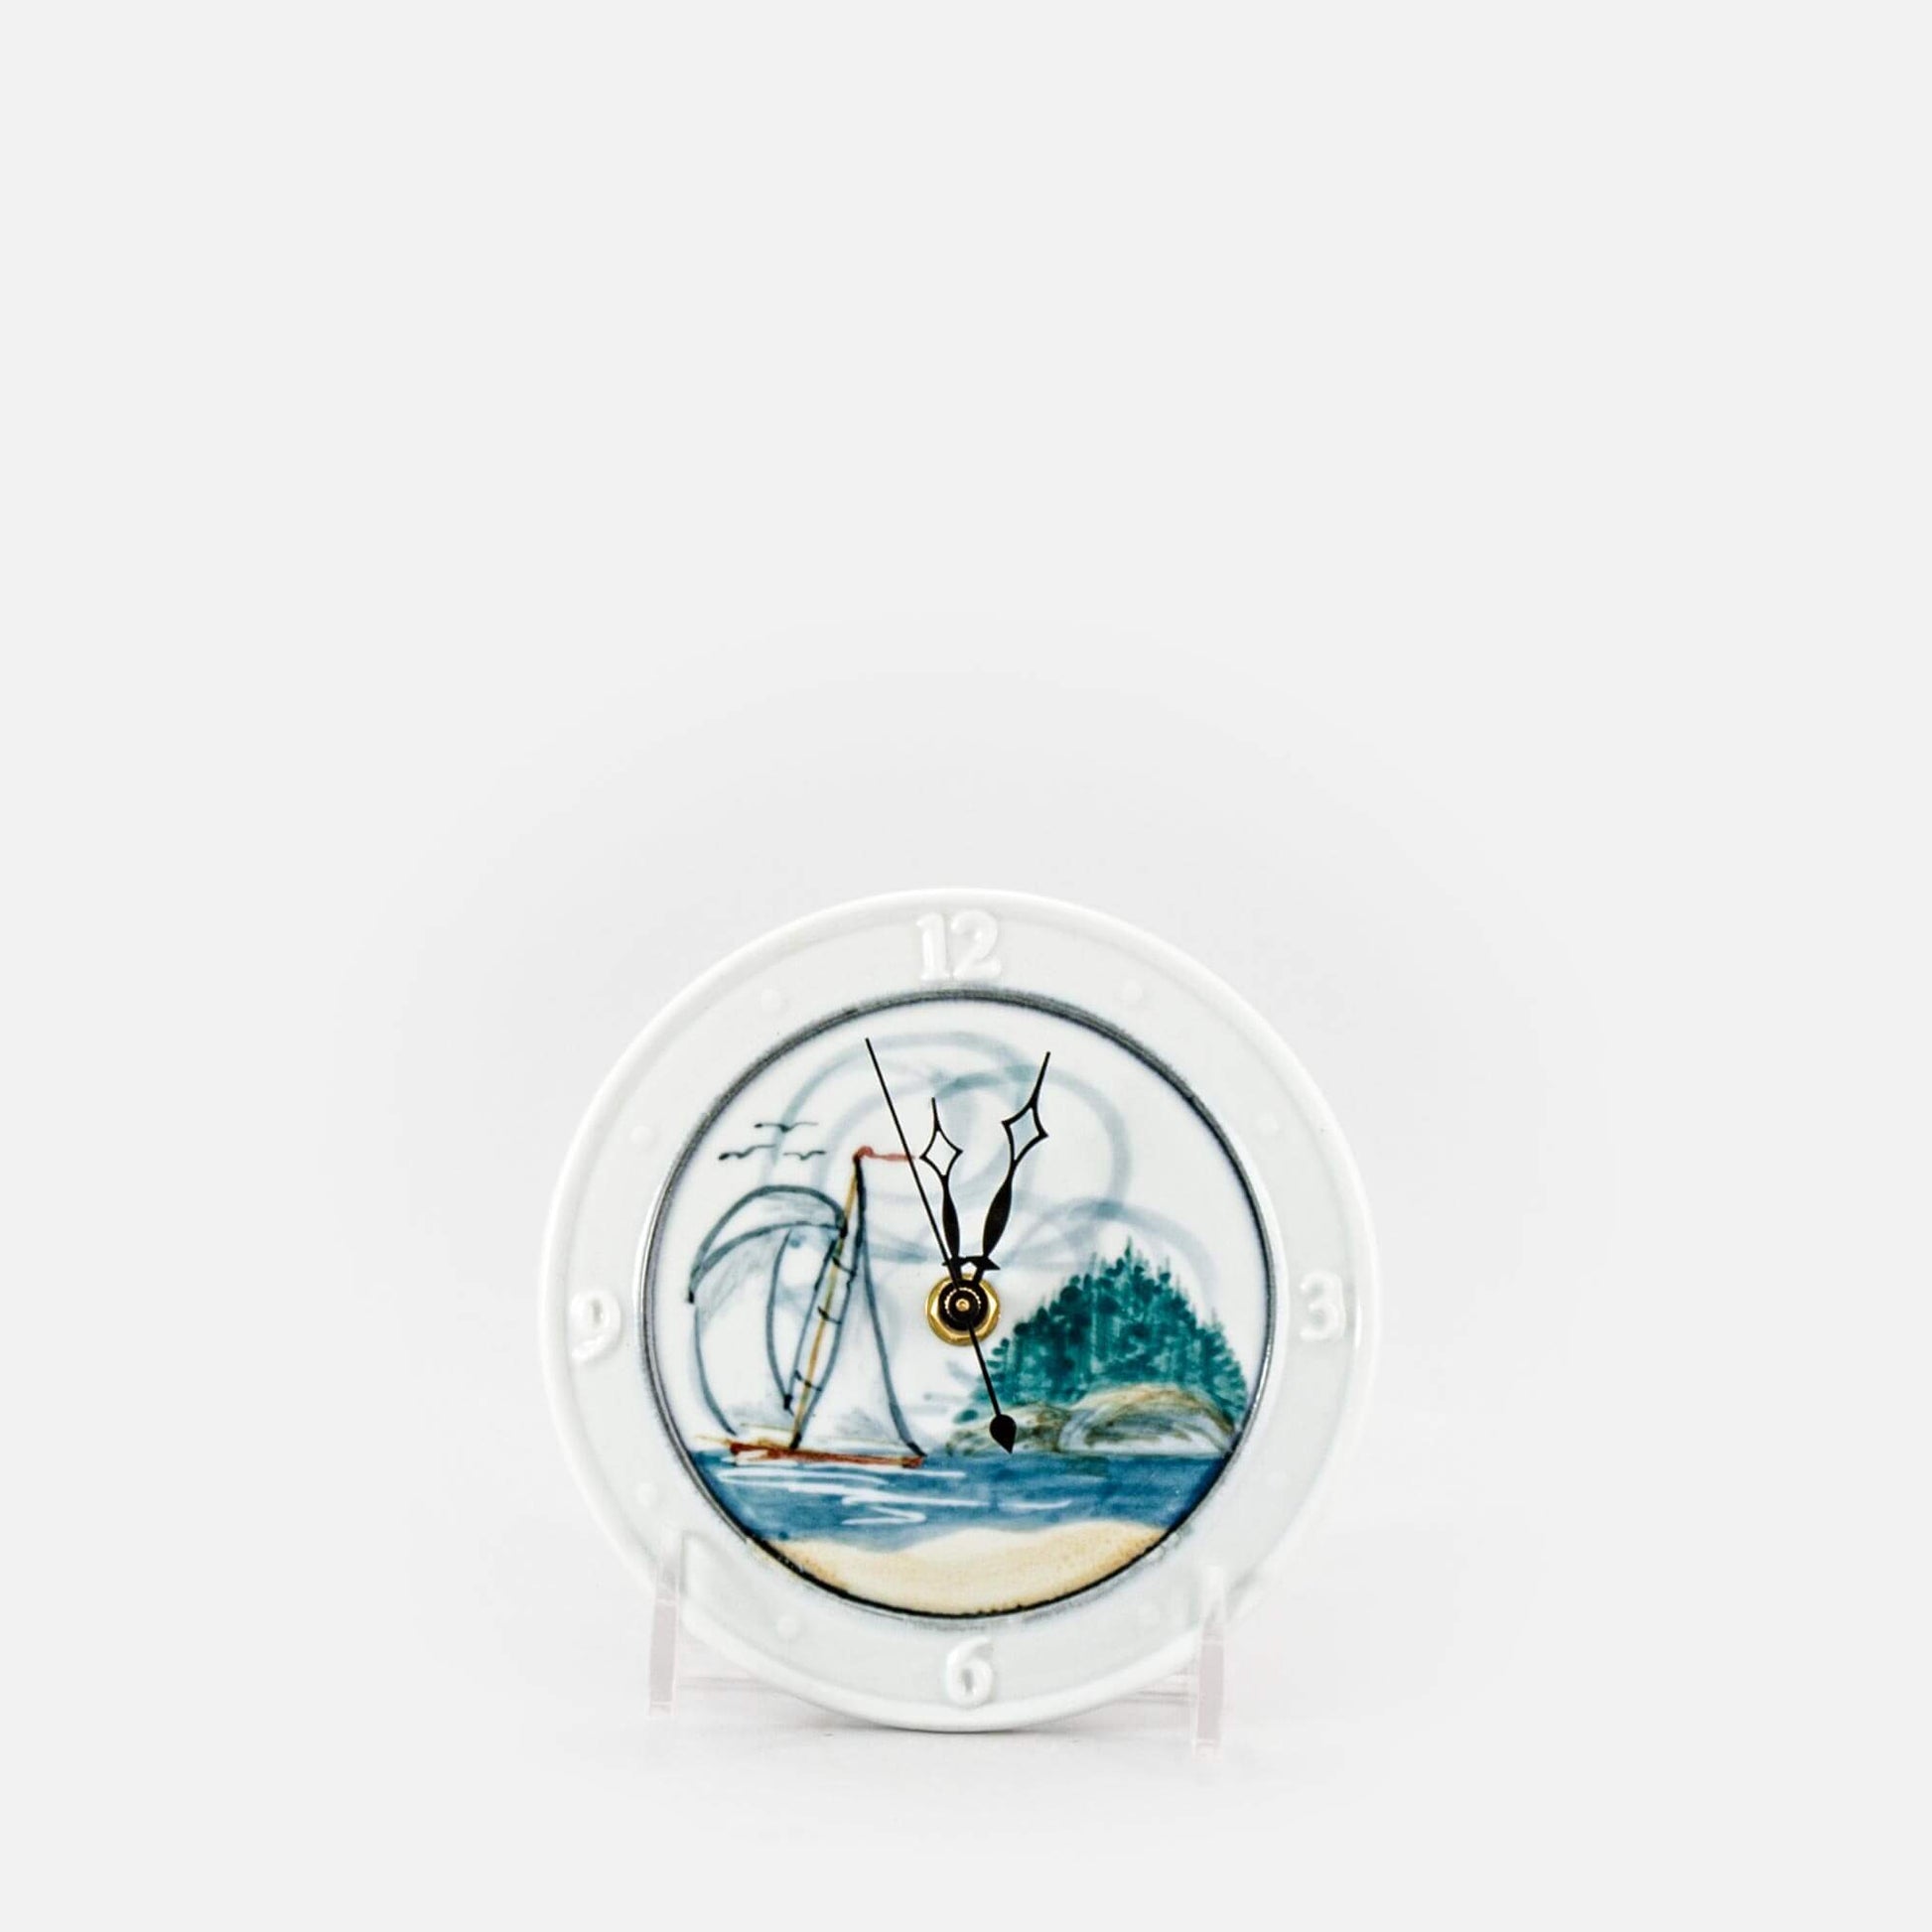 Handmade Pottery Small Clock w/ Stand in Sailboat pattern made by Georgetown Pottery in Maine